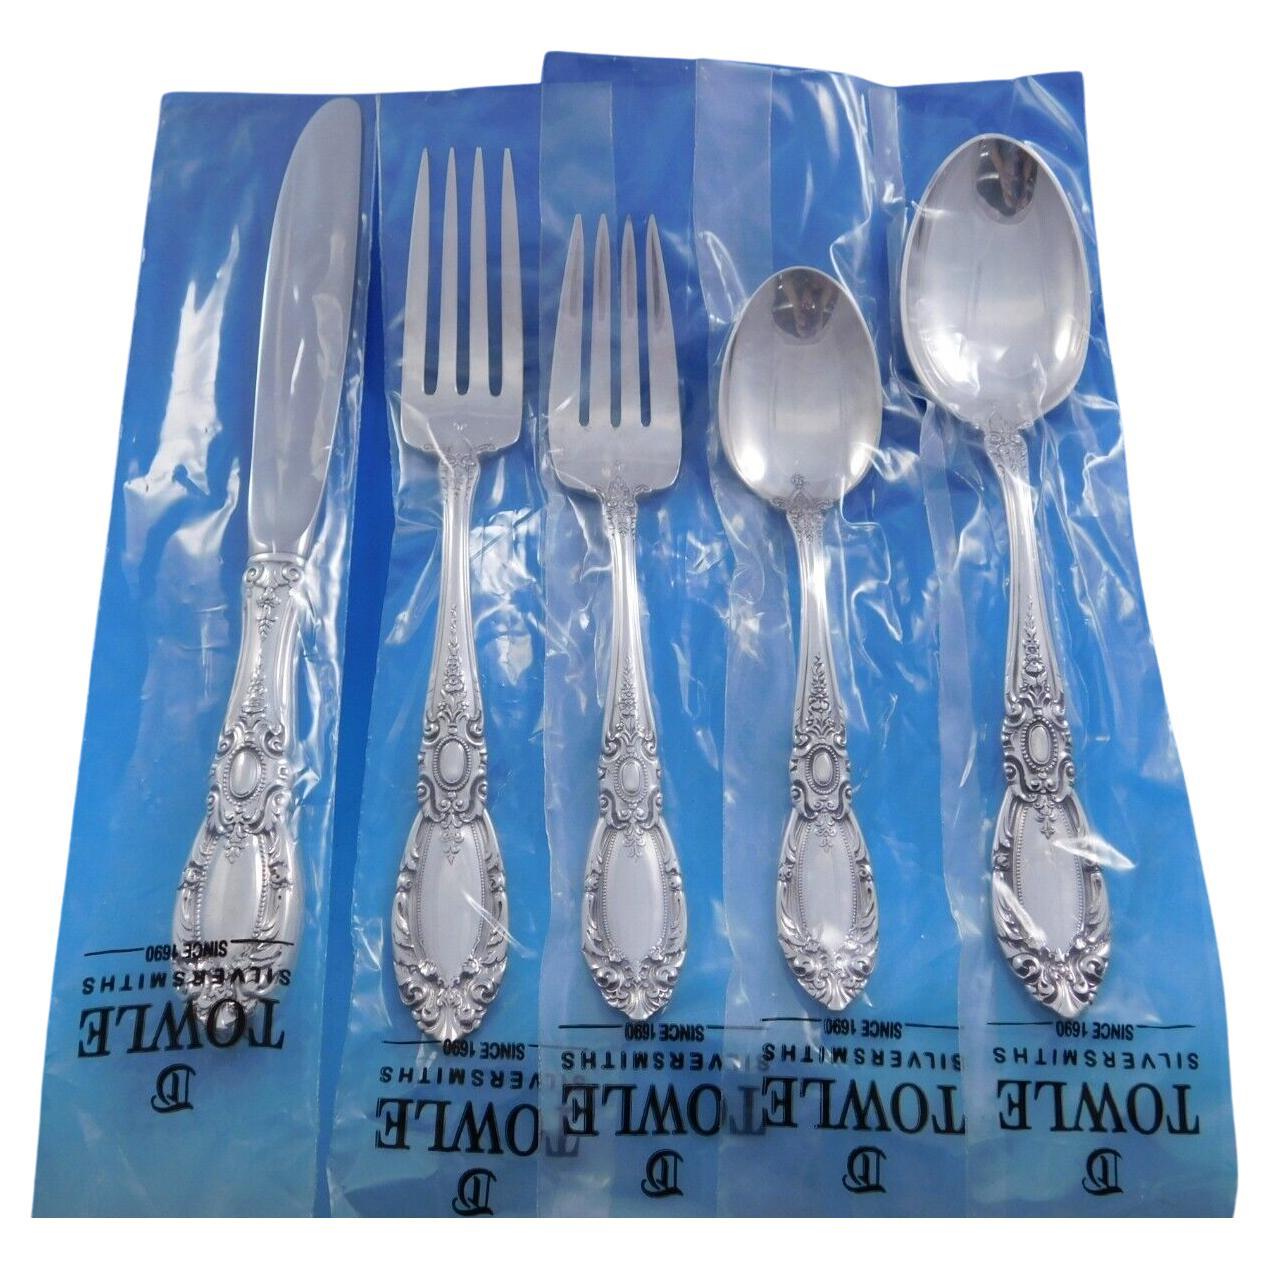 A Richard by Towle Sterling Silver Flatware Set For 8 Service 40 Pieces New en vente